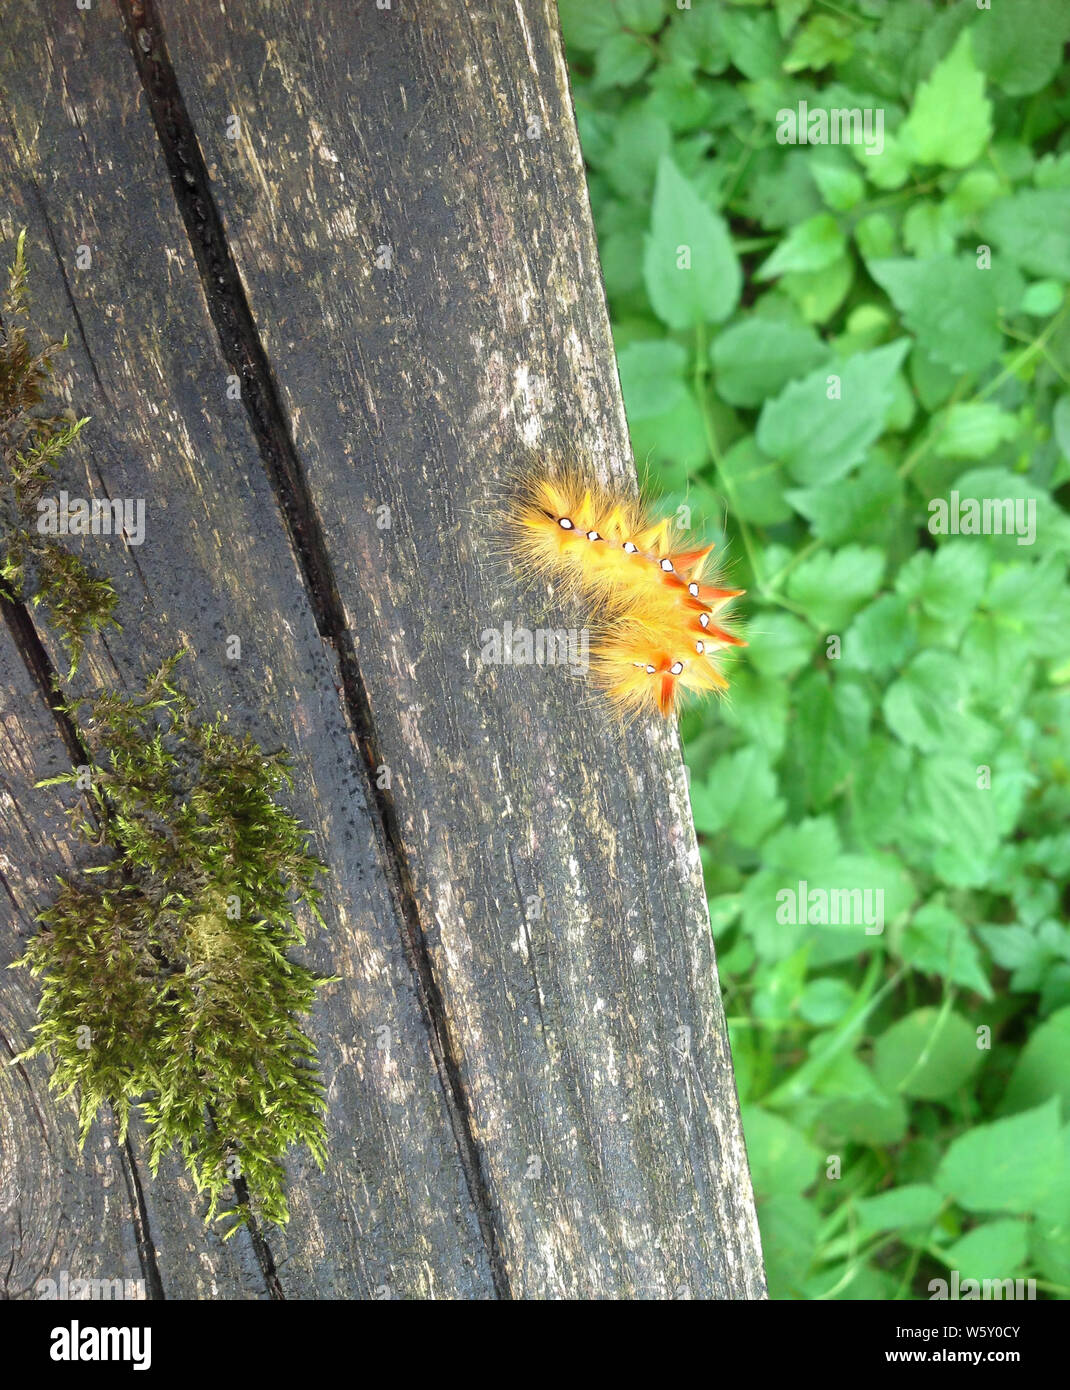 Sycamore moth larva. Acronicta aceris caterpillar, on weathered old wood with moss above green leaves. Stock Photo